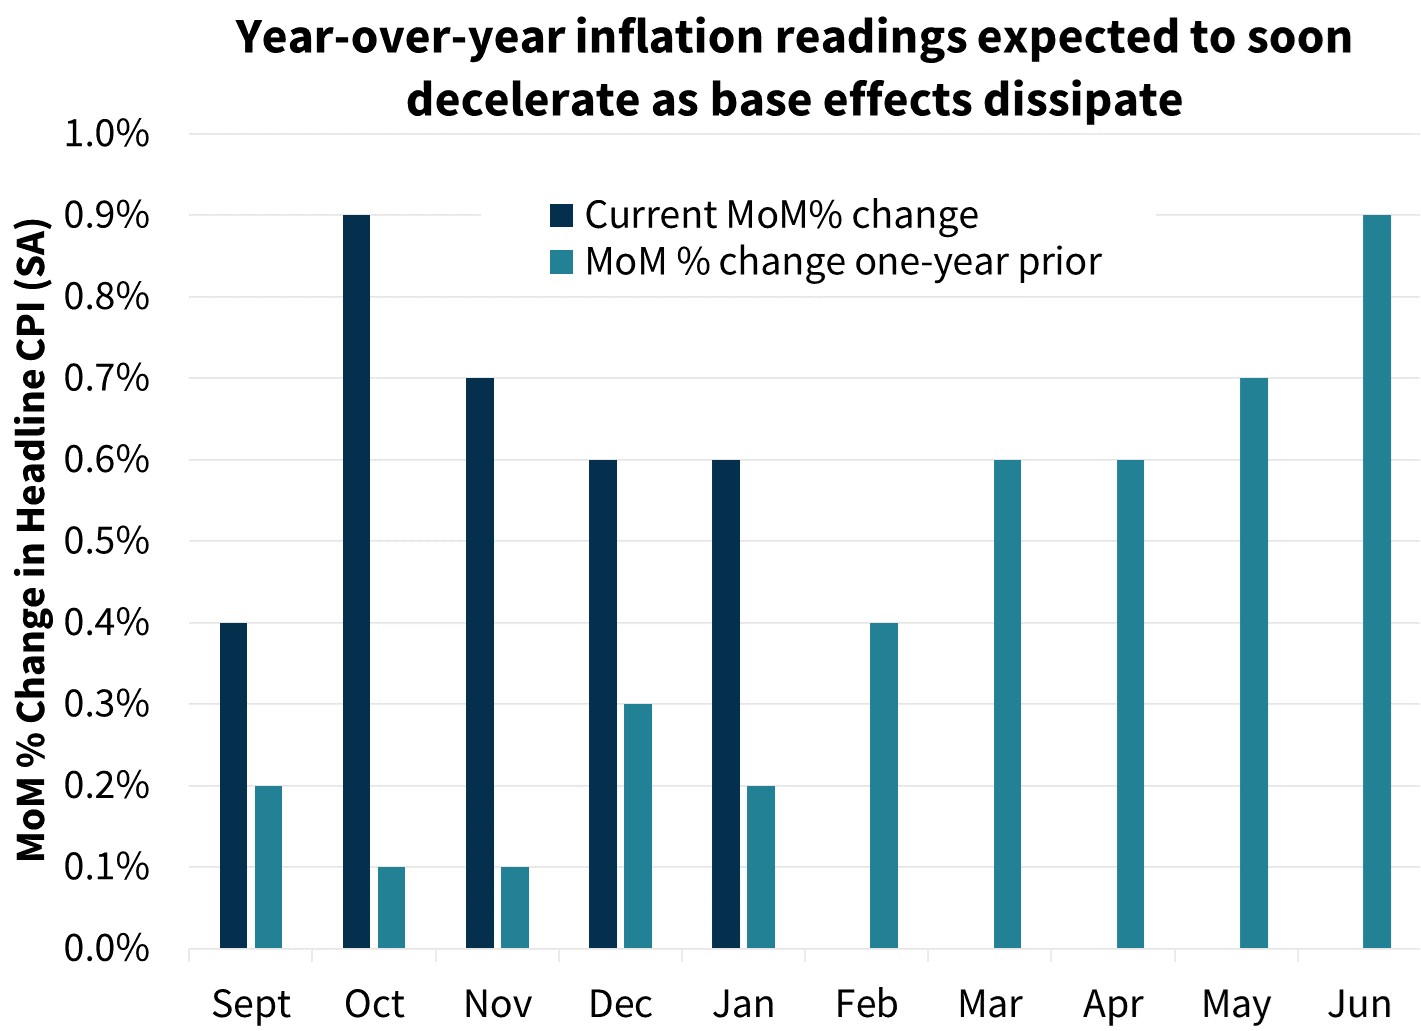 Year-over-year inflation readings expected to soon decelerate as base effects dissipate